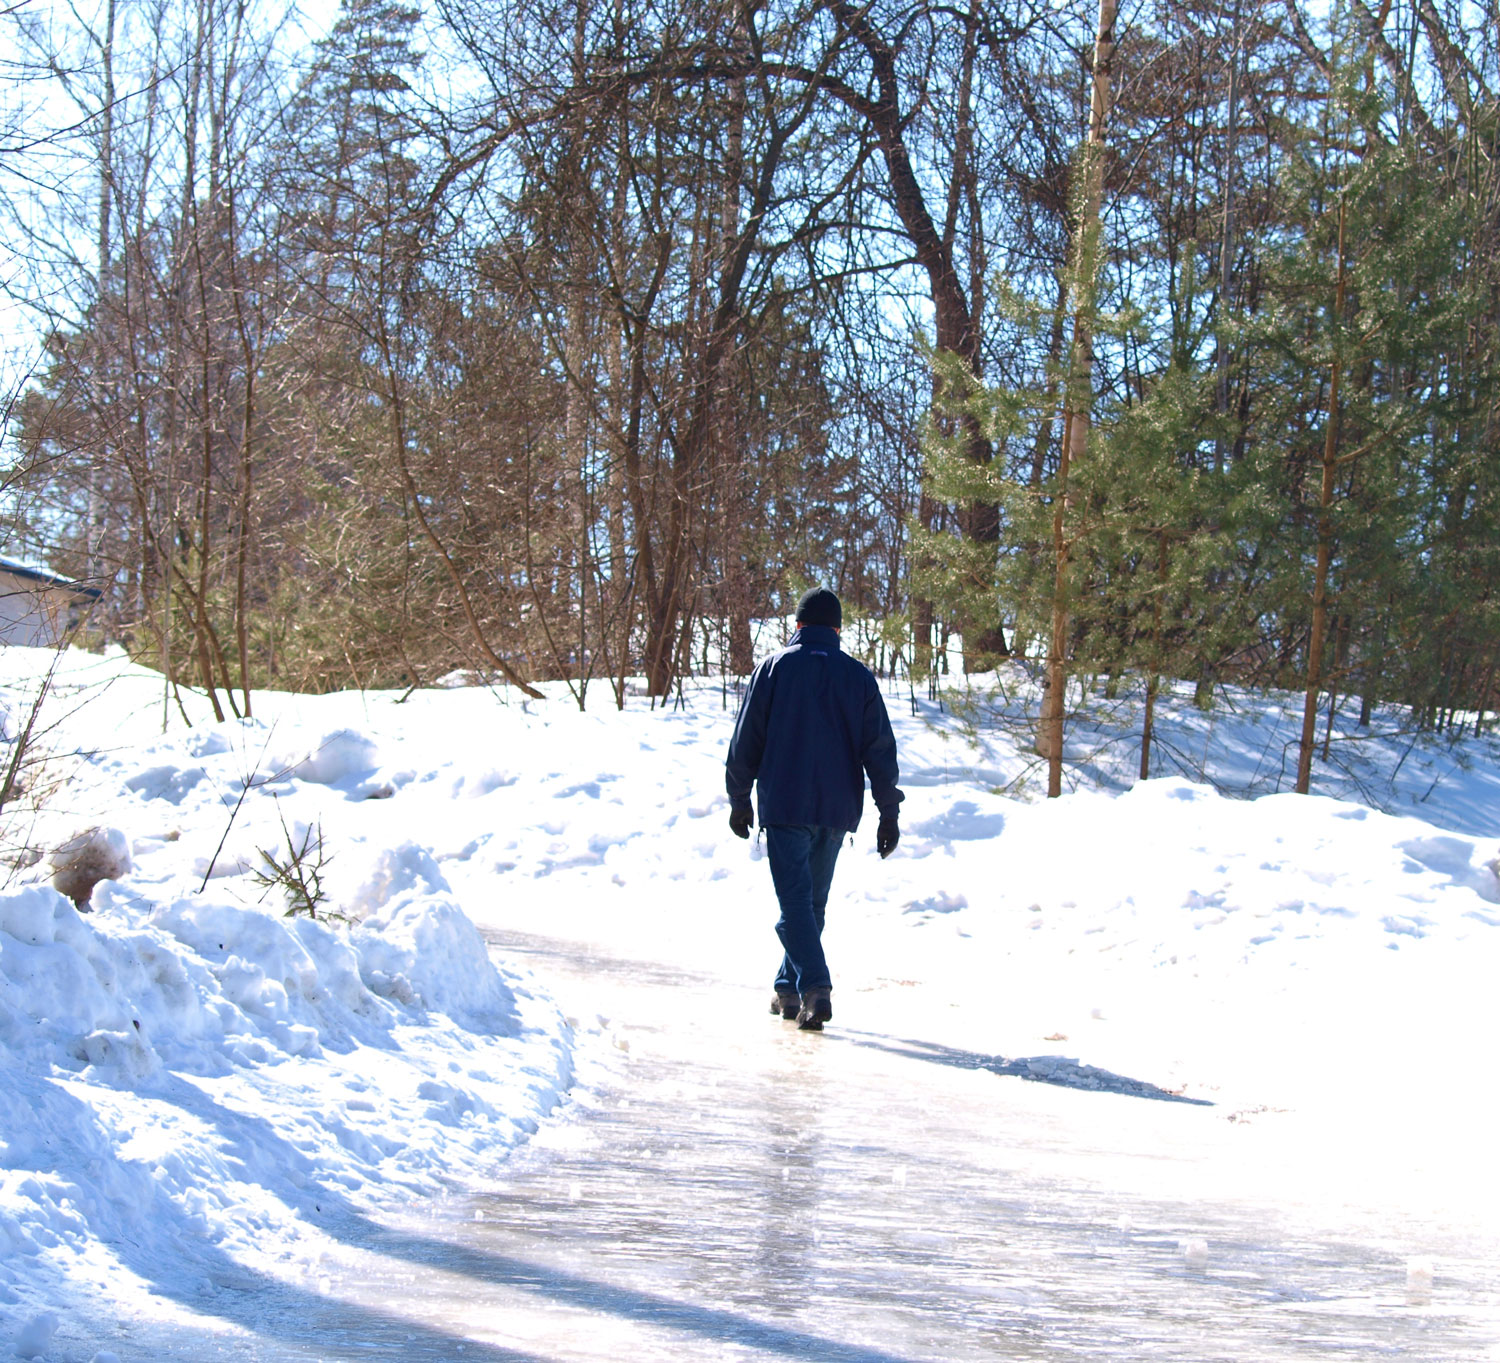 A man hiking on an ice covered path